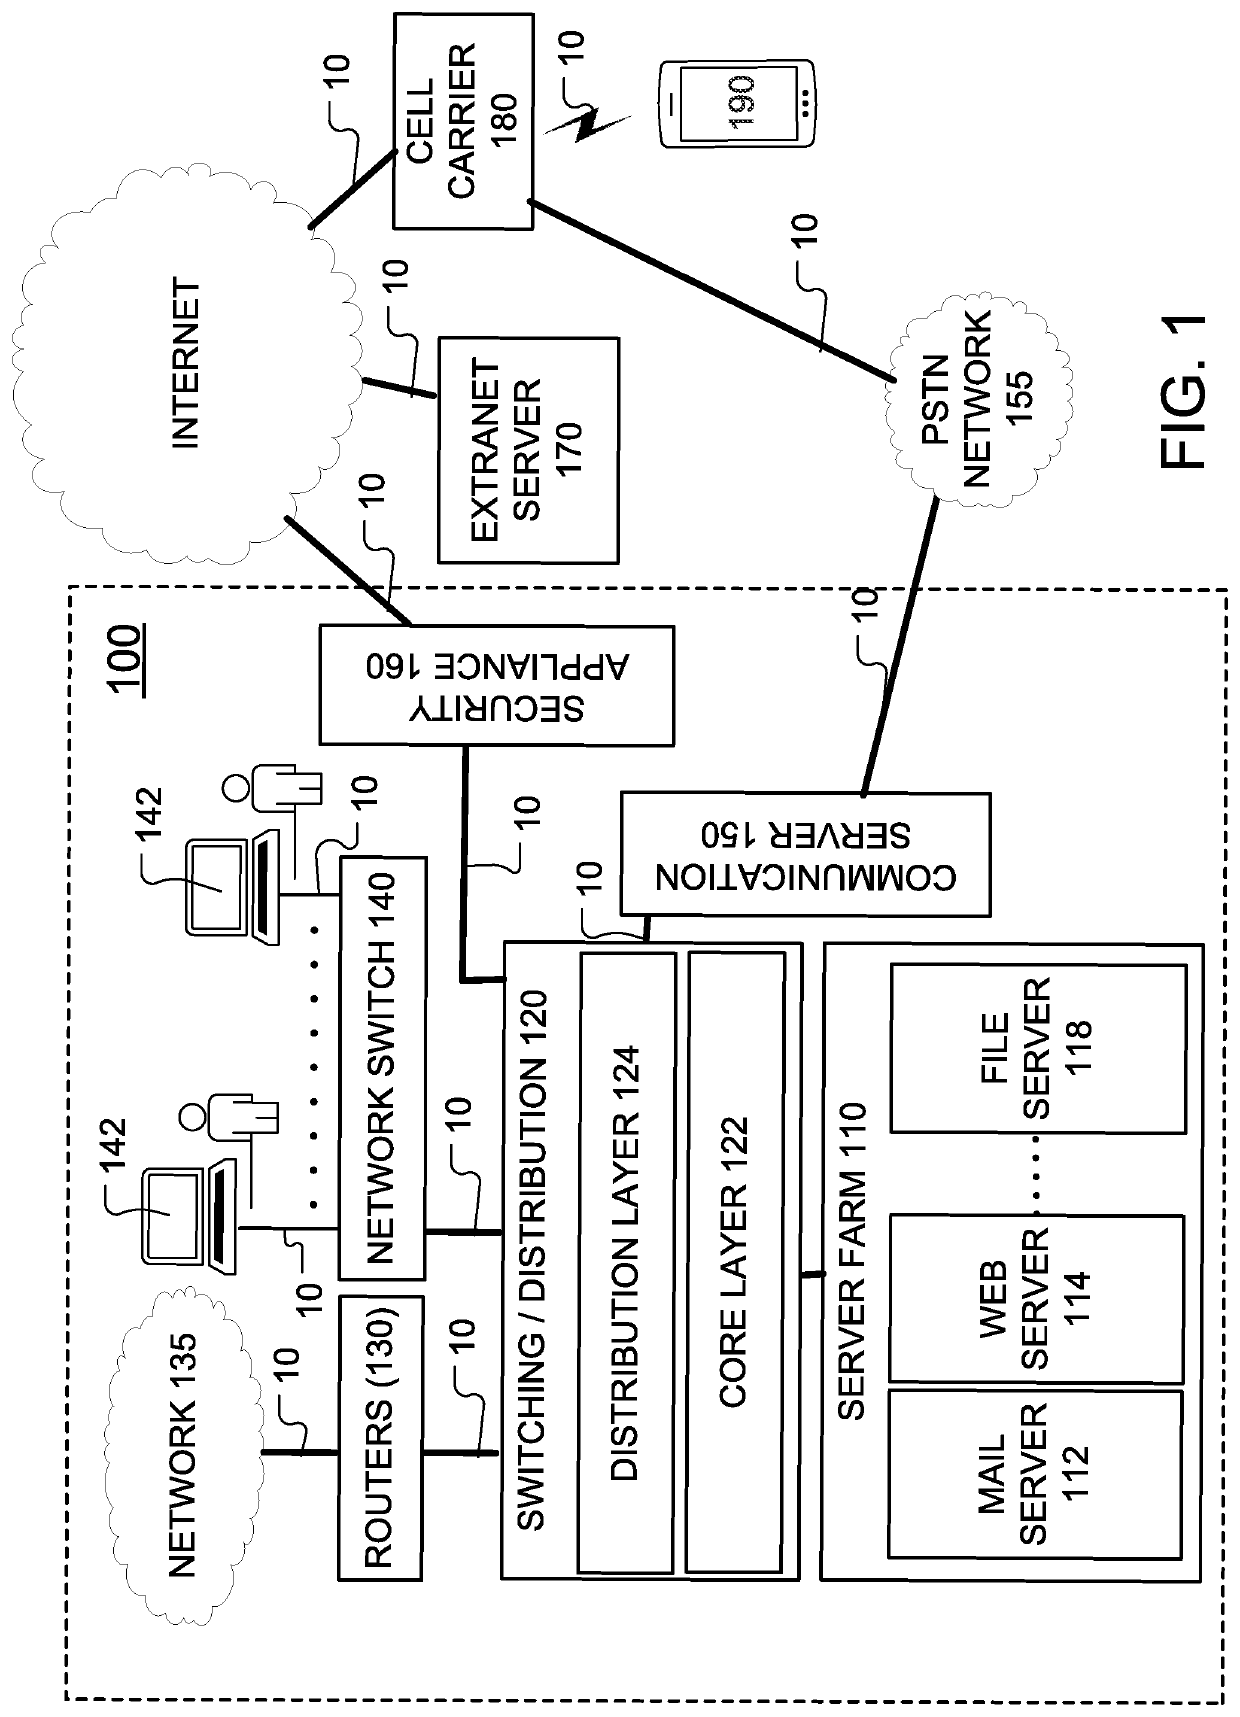 System and method for provisioning non-enterprise client devices with access credentials